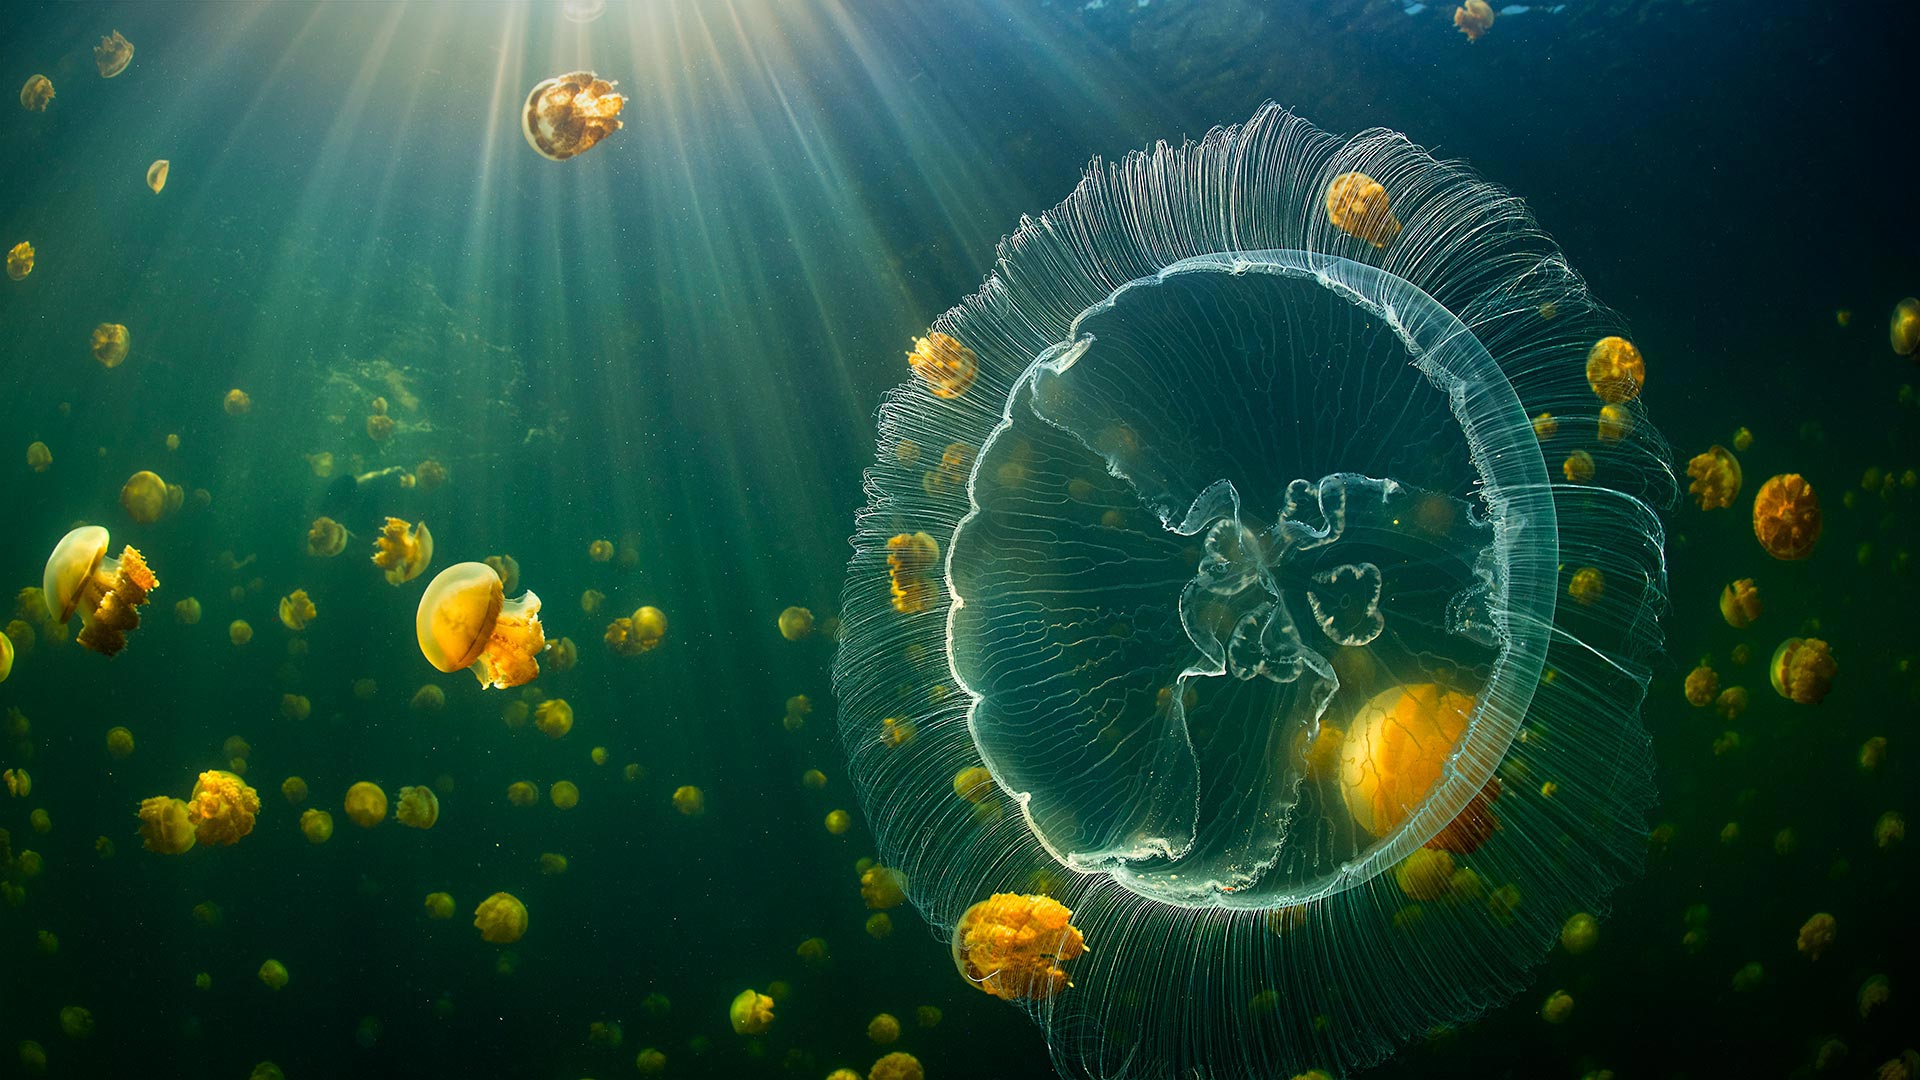 Moon jelly and golden jellyfish, Raja Ampat, West Papua, Indonesia - Alex Mustard